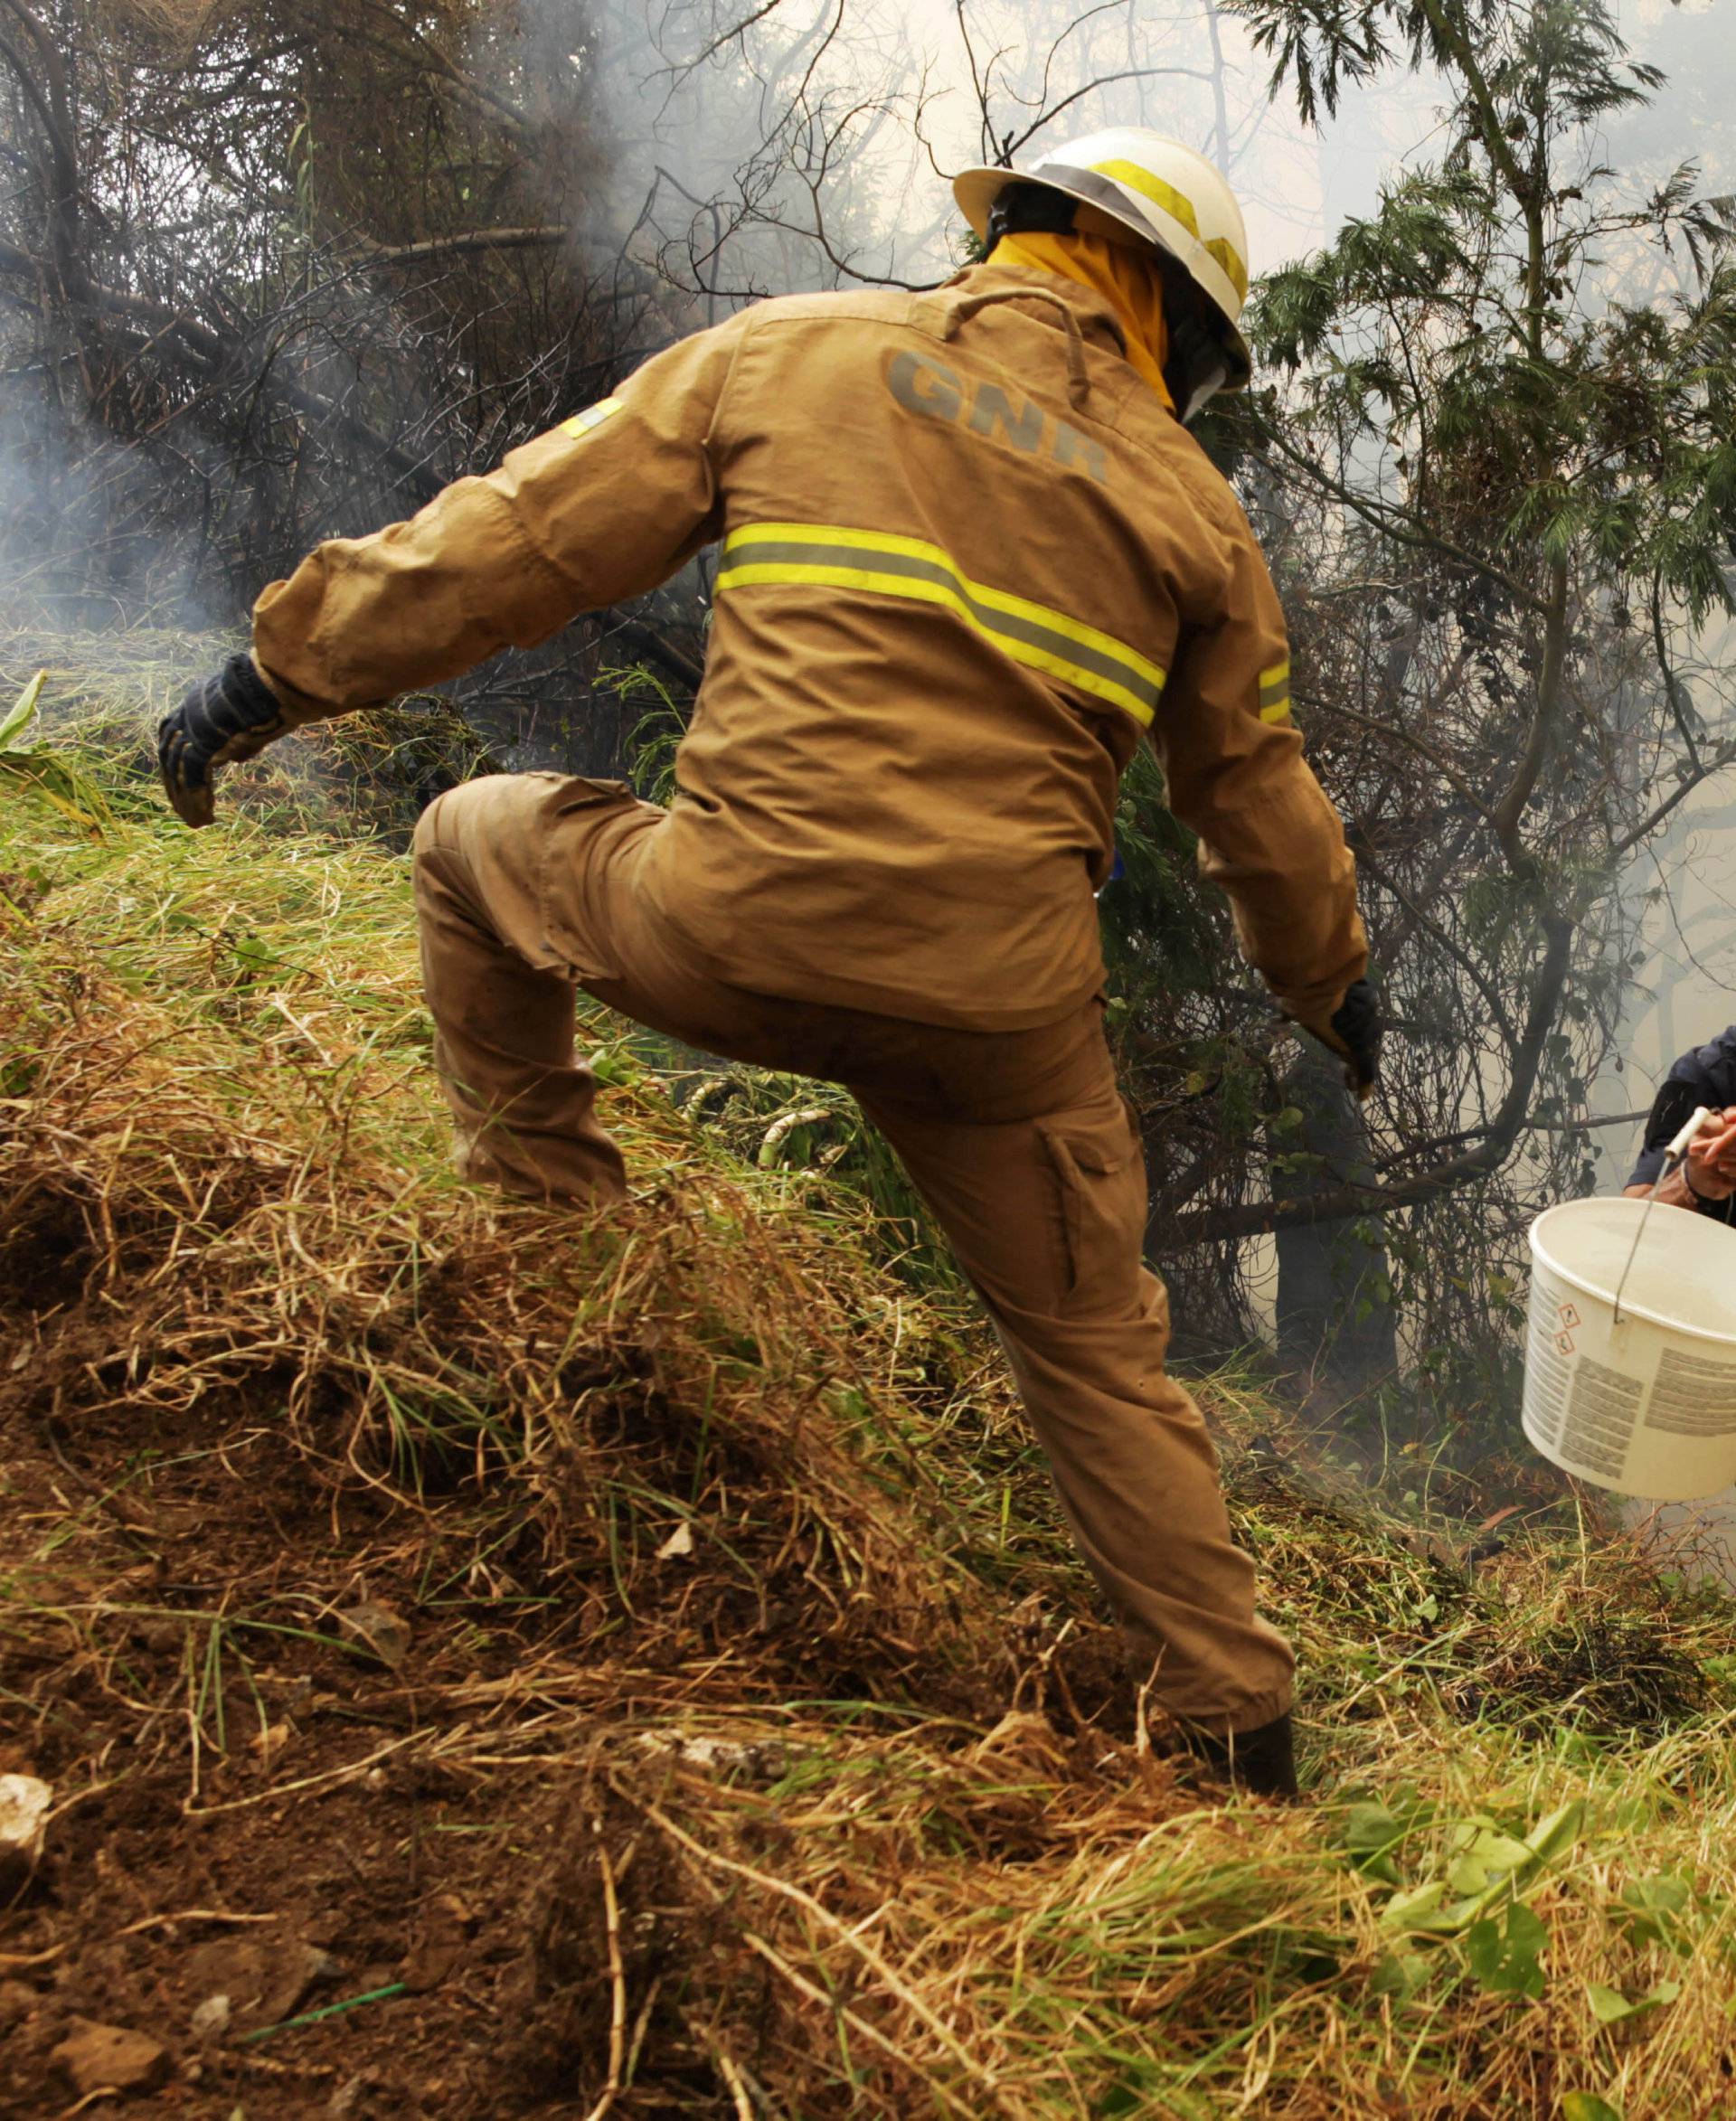 Police officers and firefighters try to extinguish a forest fire near houses at Sao Joao Latrao, Funchal, Madeira island